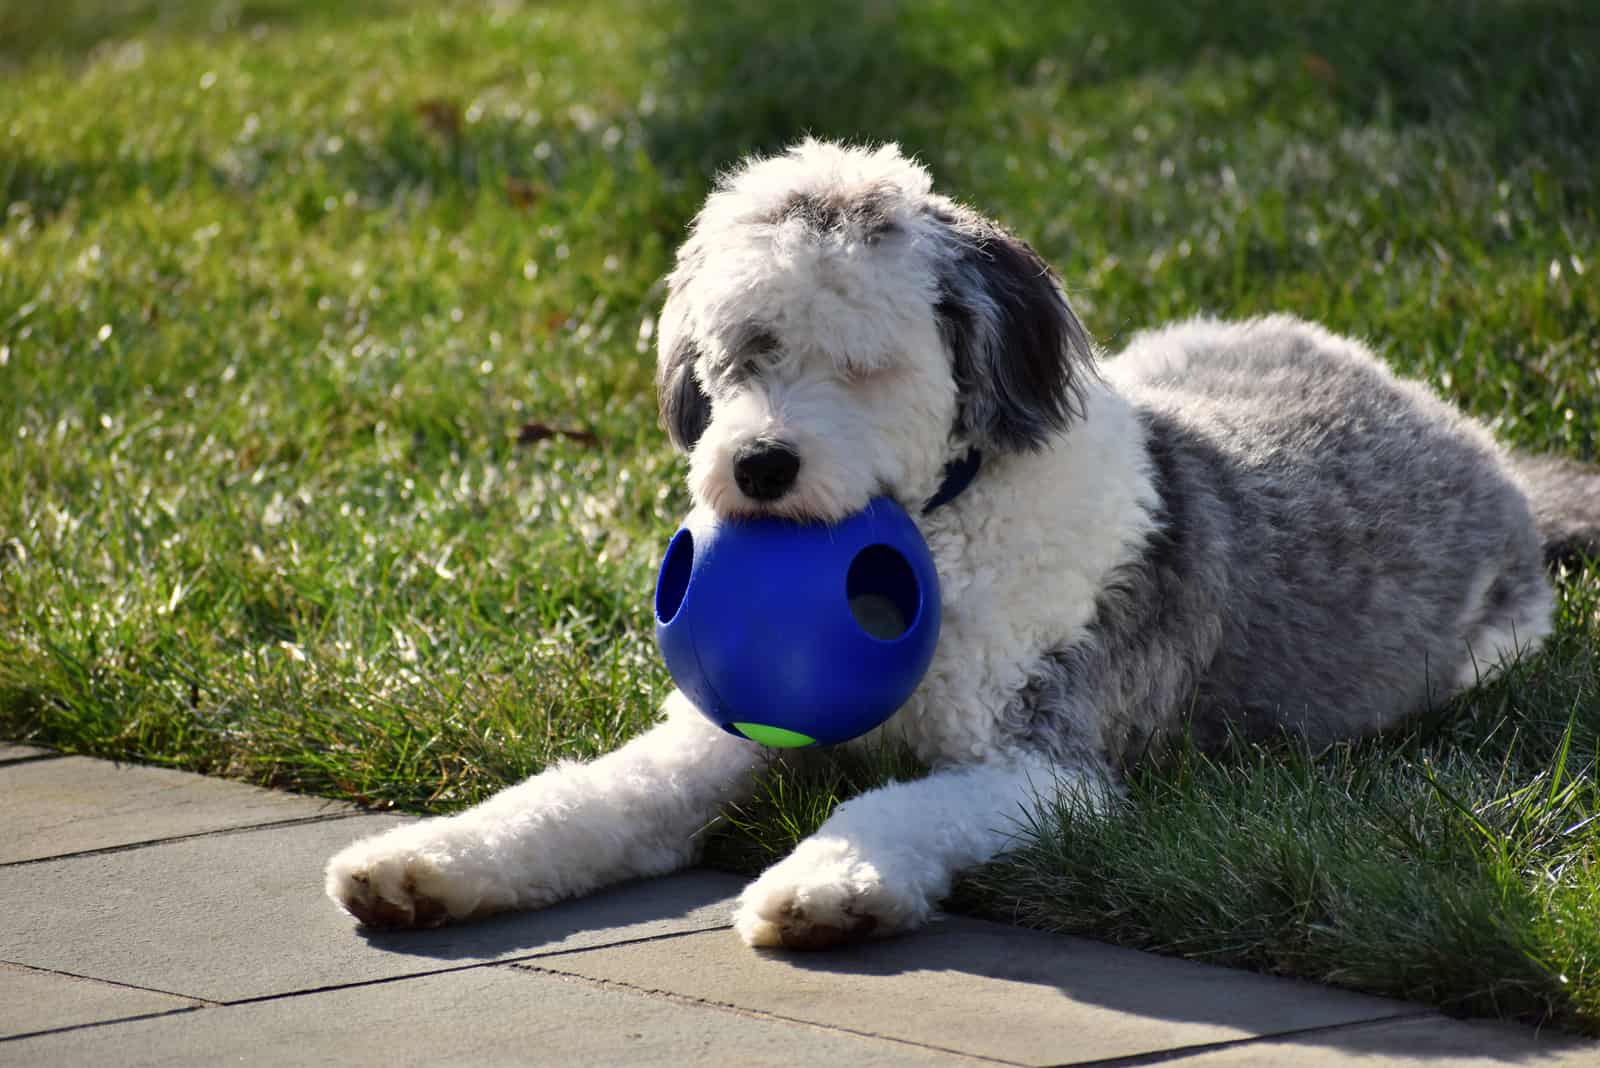 Sheepadoodle lies and holds the ball in his mouth